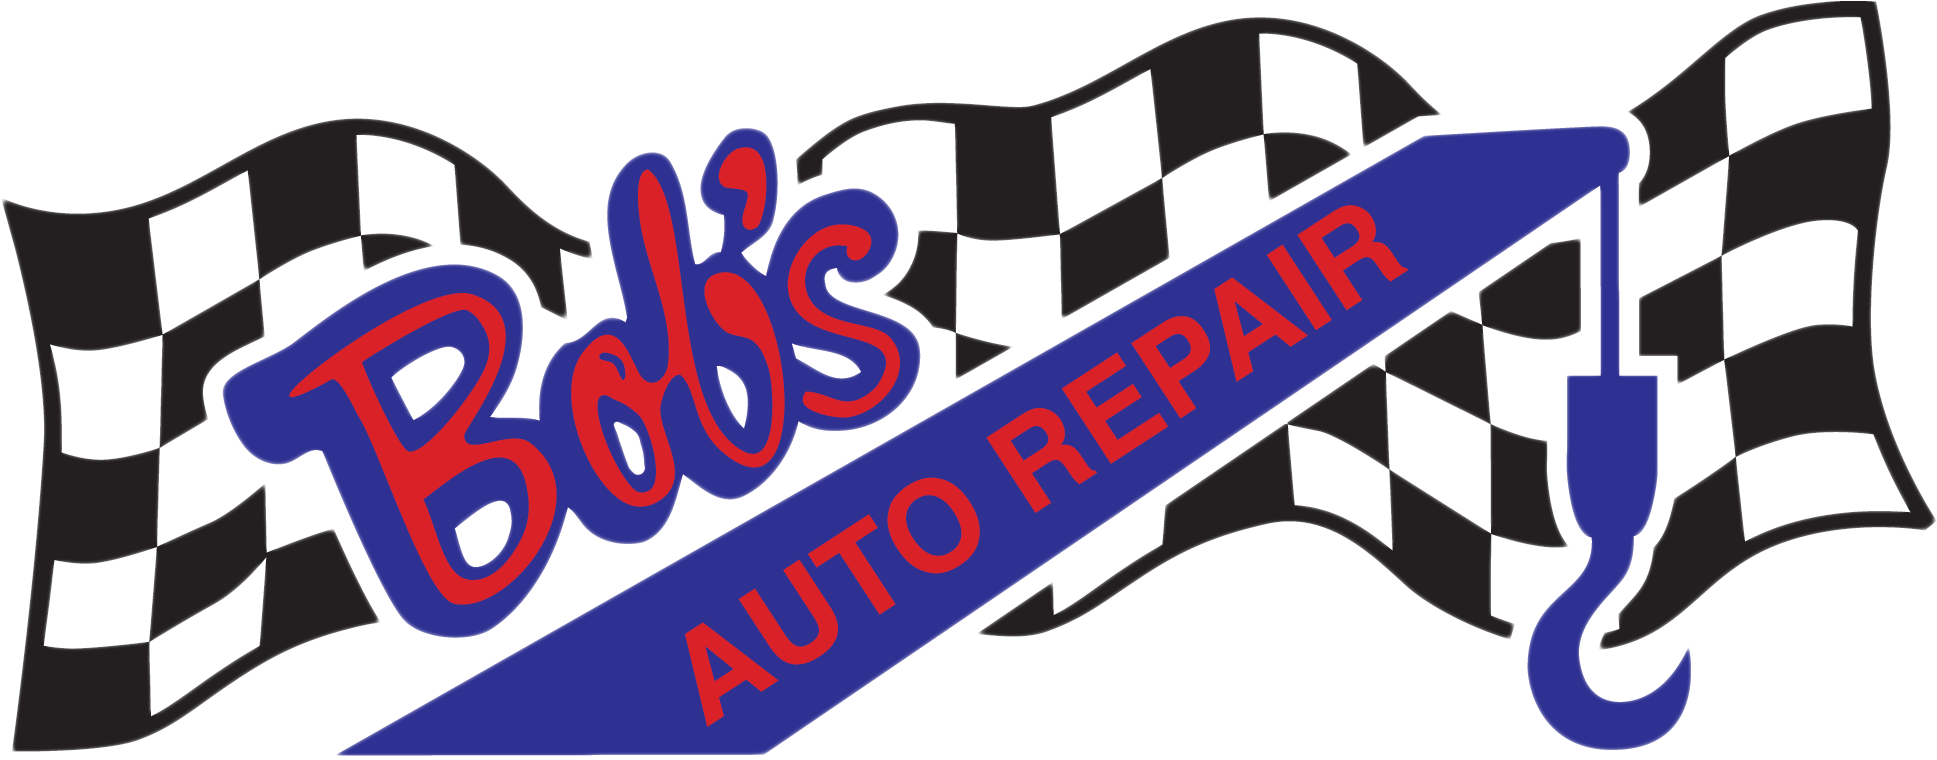 F79b8b - Bob's Auto Repair And Towing (1936x774), Png Download